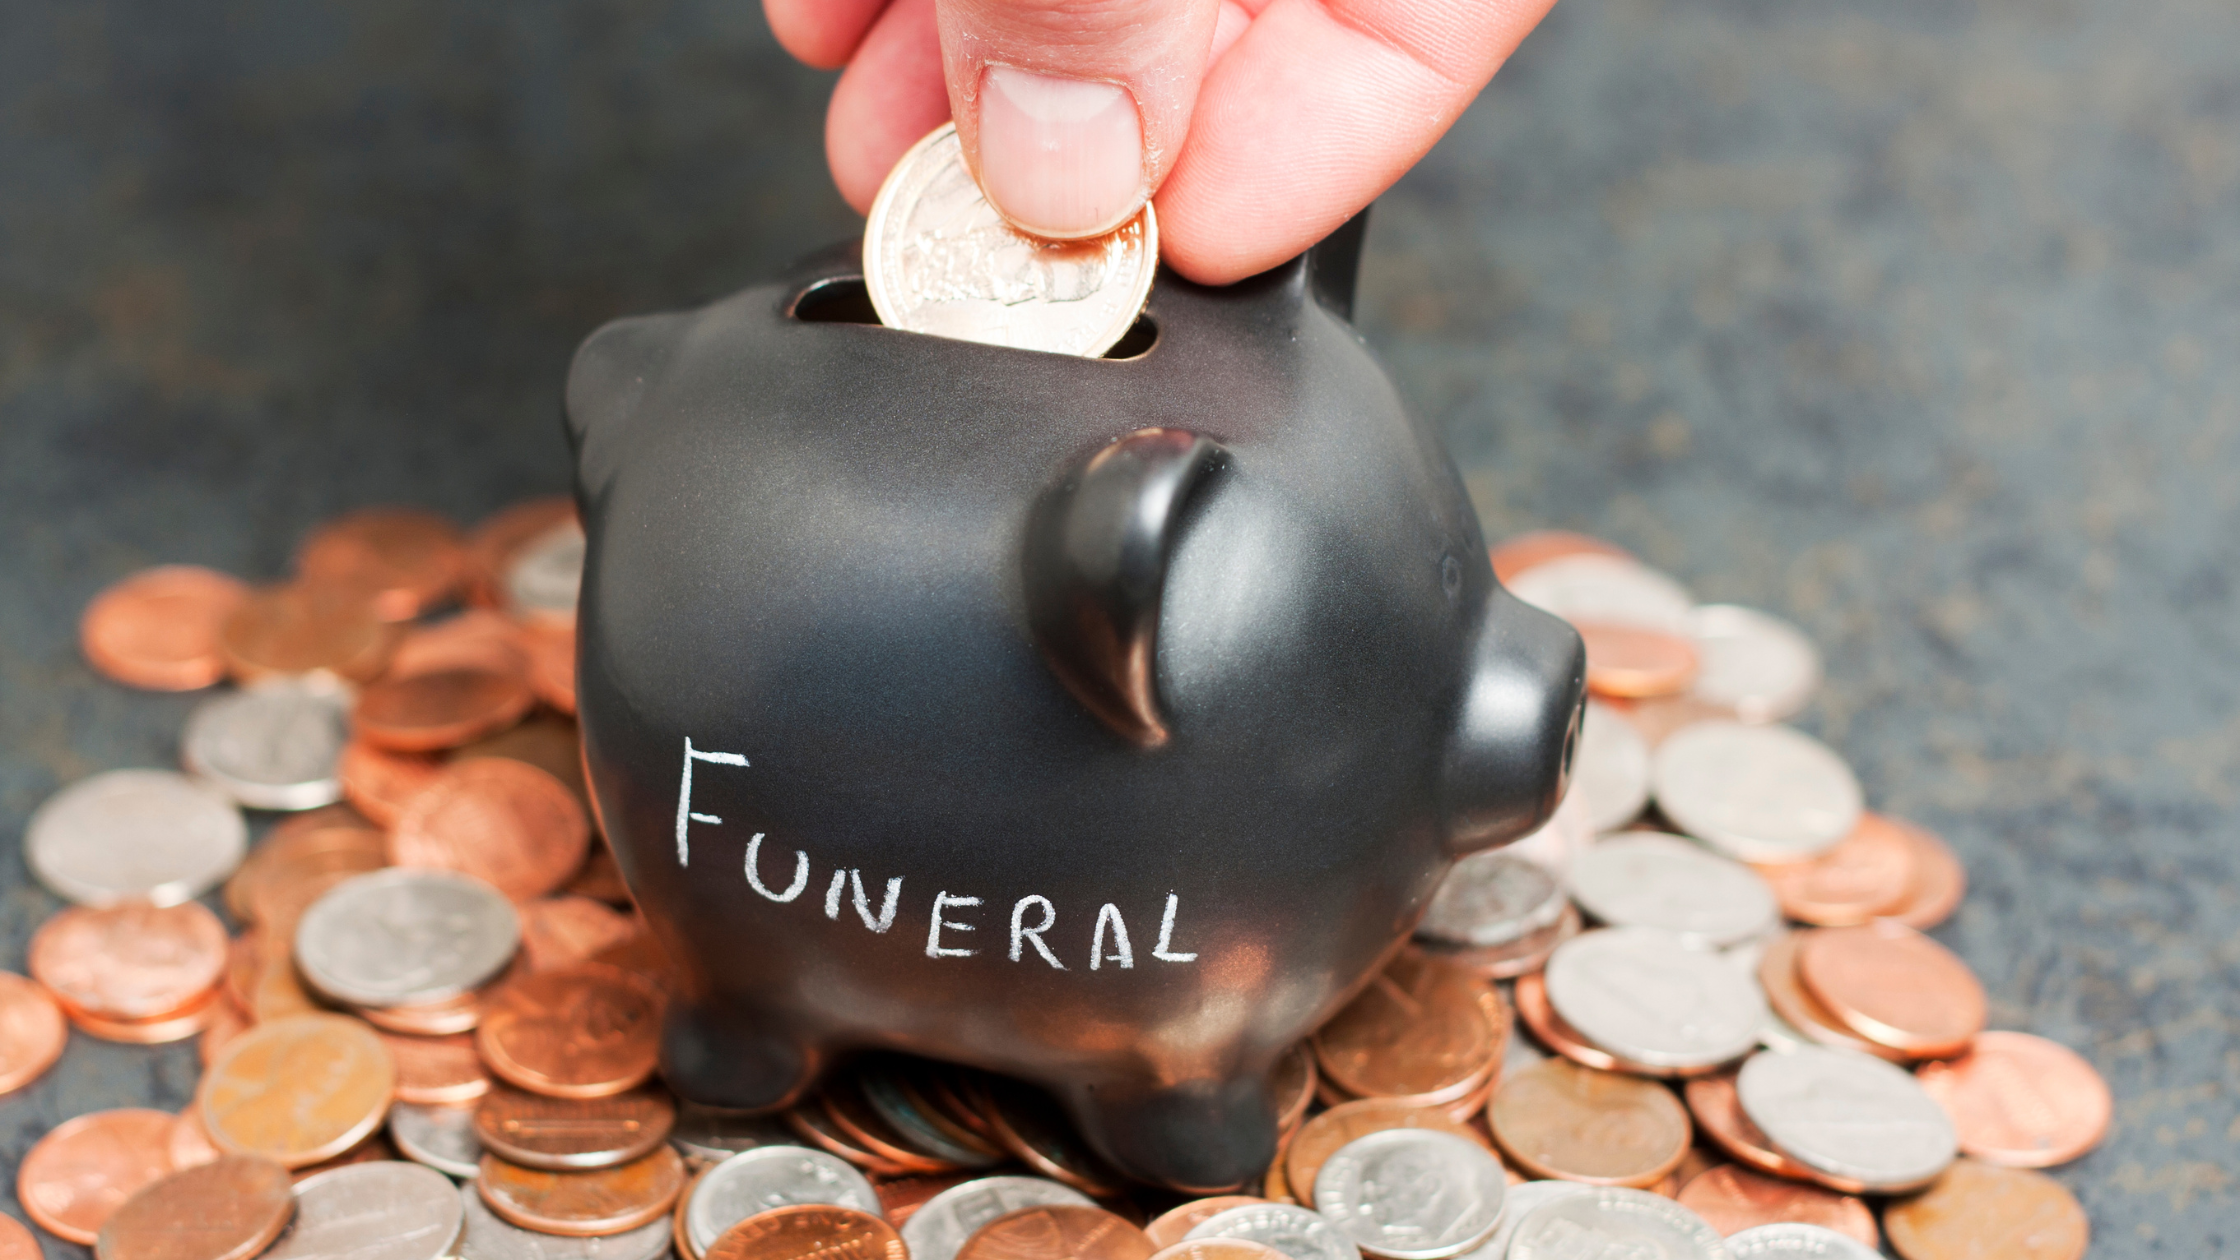 How to Plan Your Own Funeral Benefits Your Family